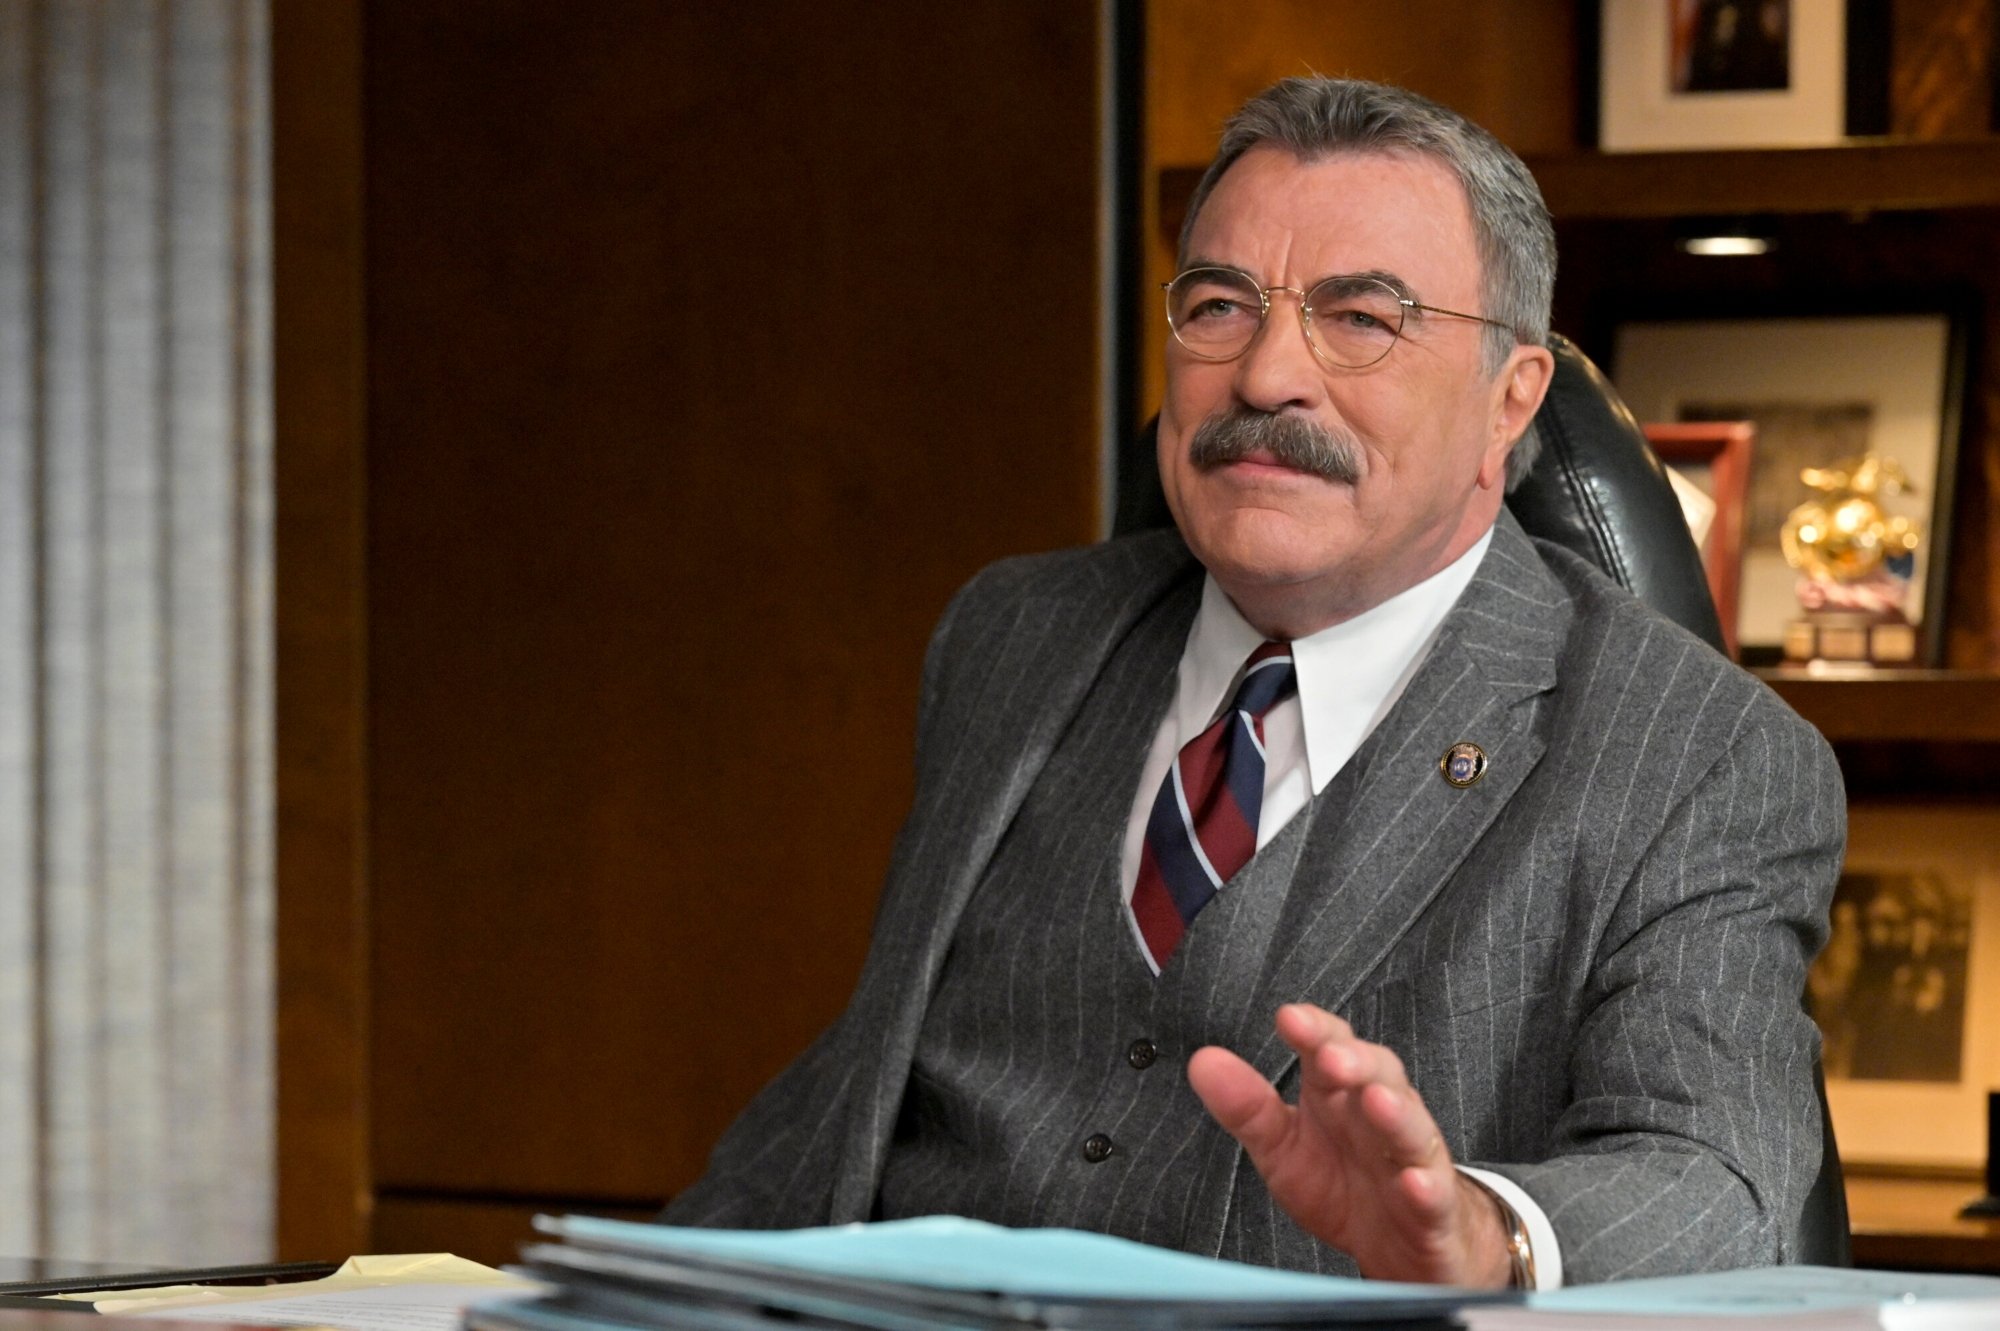 'Blue Bloods' Tom Selleck as Frank Reagan wearing a suit, tie, and glasses. He's sitting at a desk with his hand slightly raised off the table.